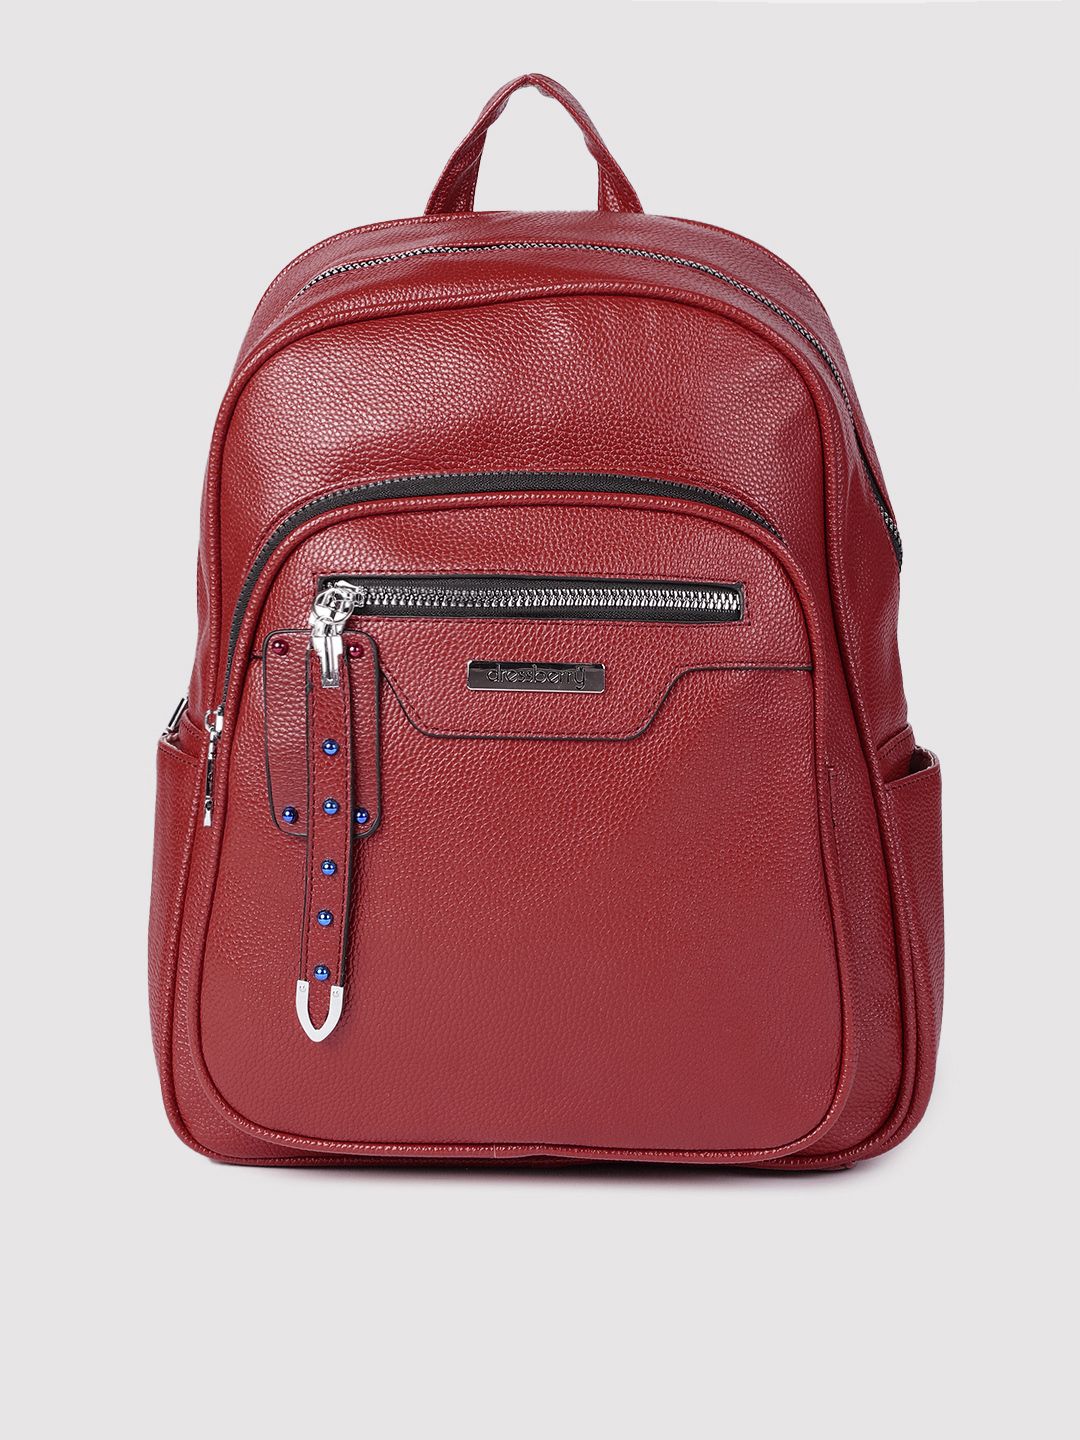 DressBerry Women Red Backpack Price in India